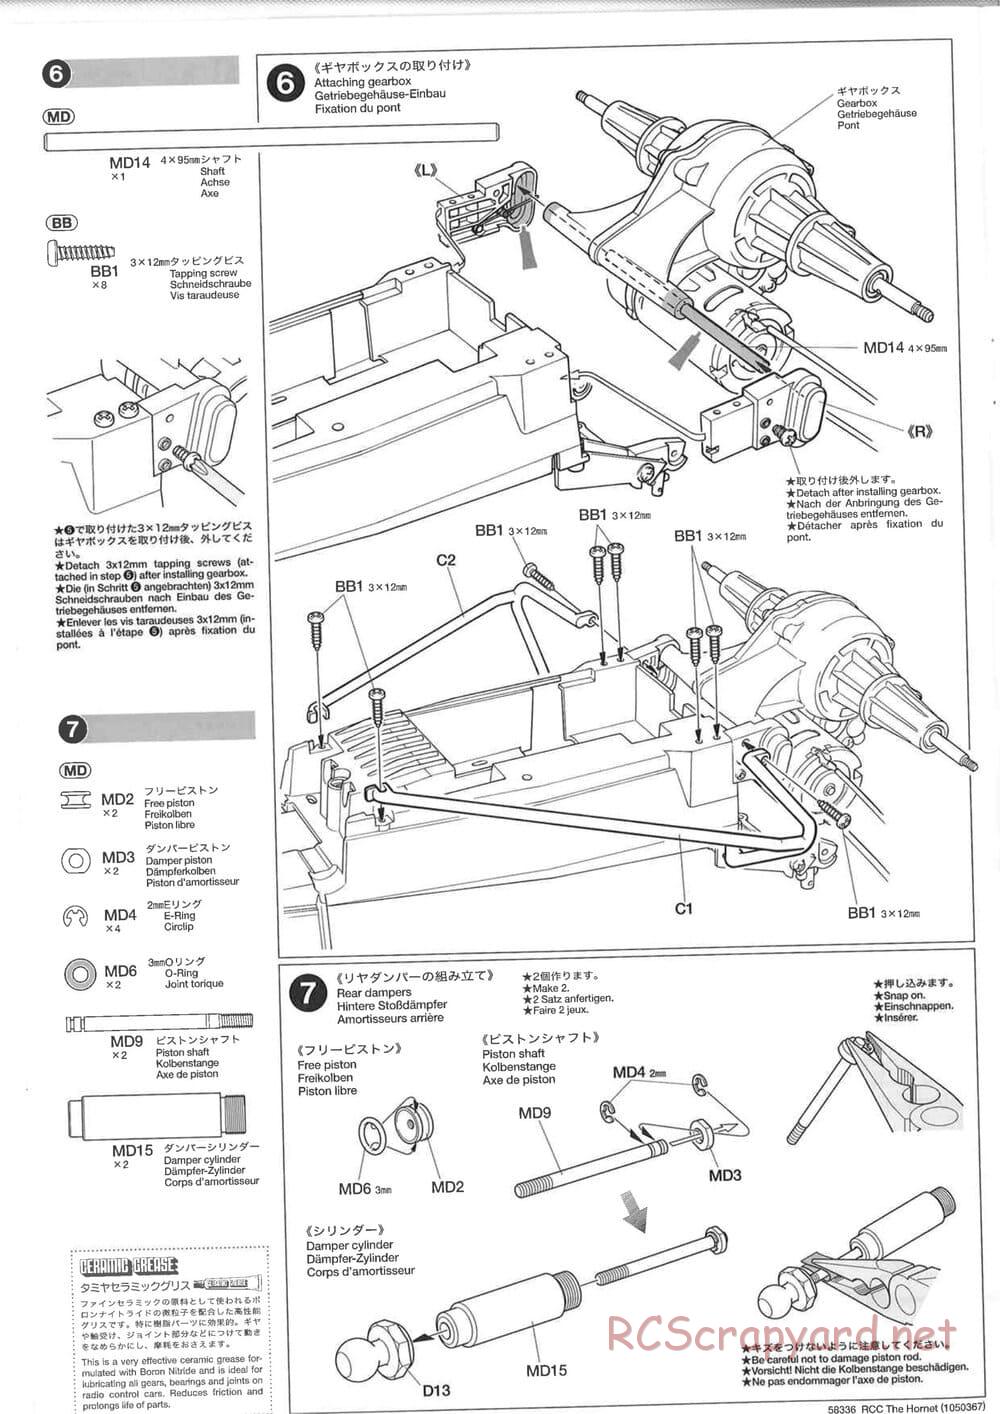 Tamiya - The Hornet (2004) - GH Chassis - Manual - Page 6